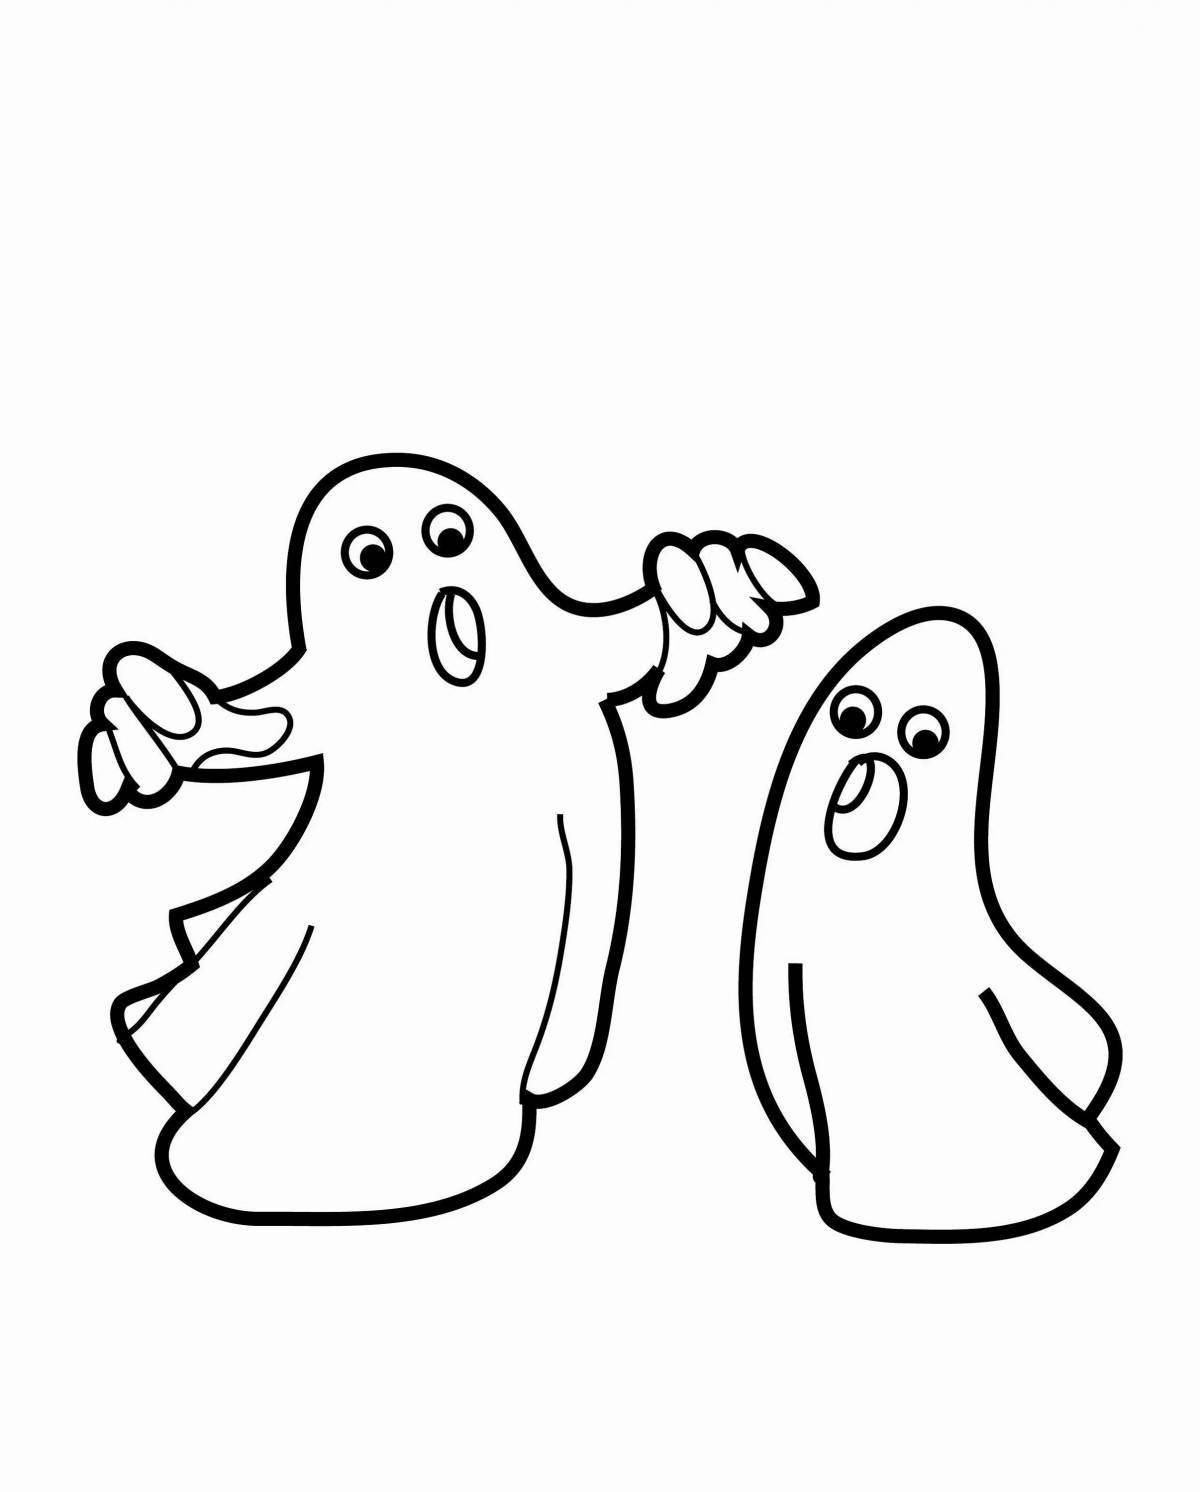 Esoteric ghost coloring book for kids